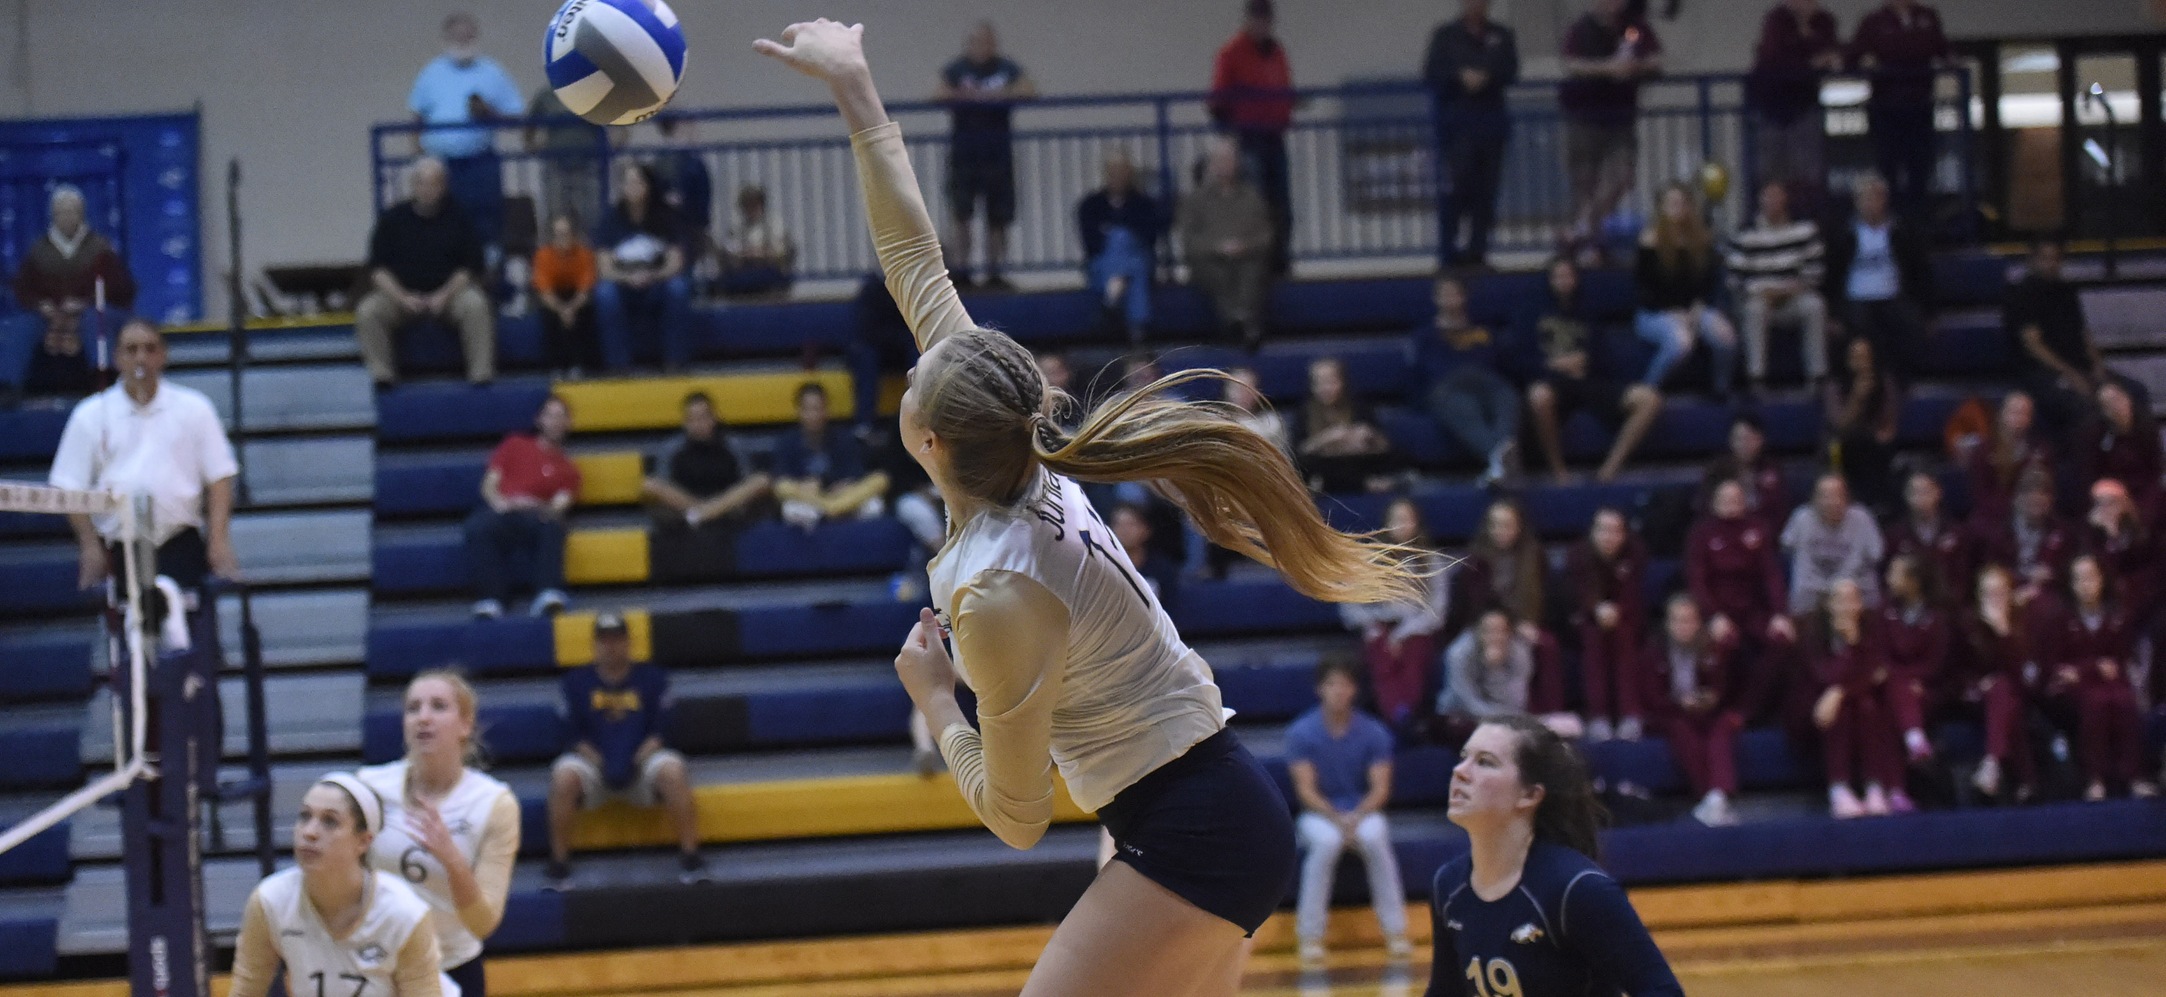 Women's Volleyball Falls to Scranton in First Ever Conference Defeat, Sweeps Susquehanna